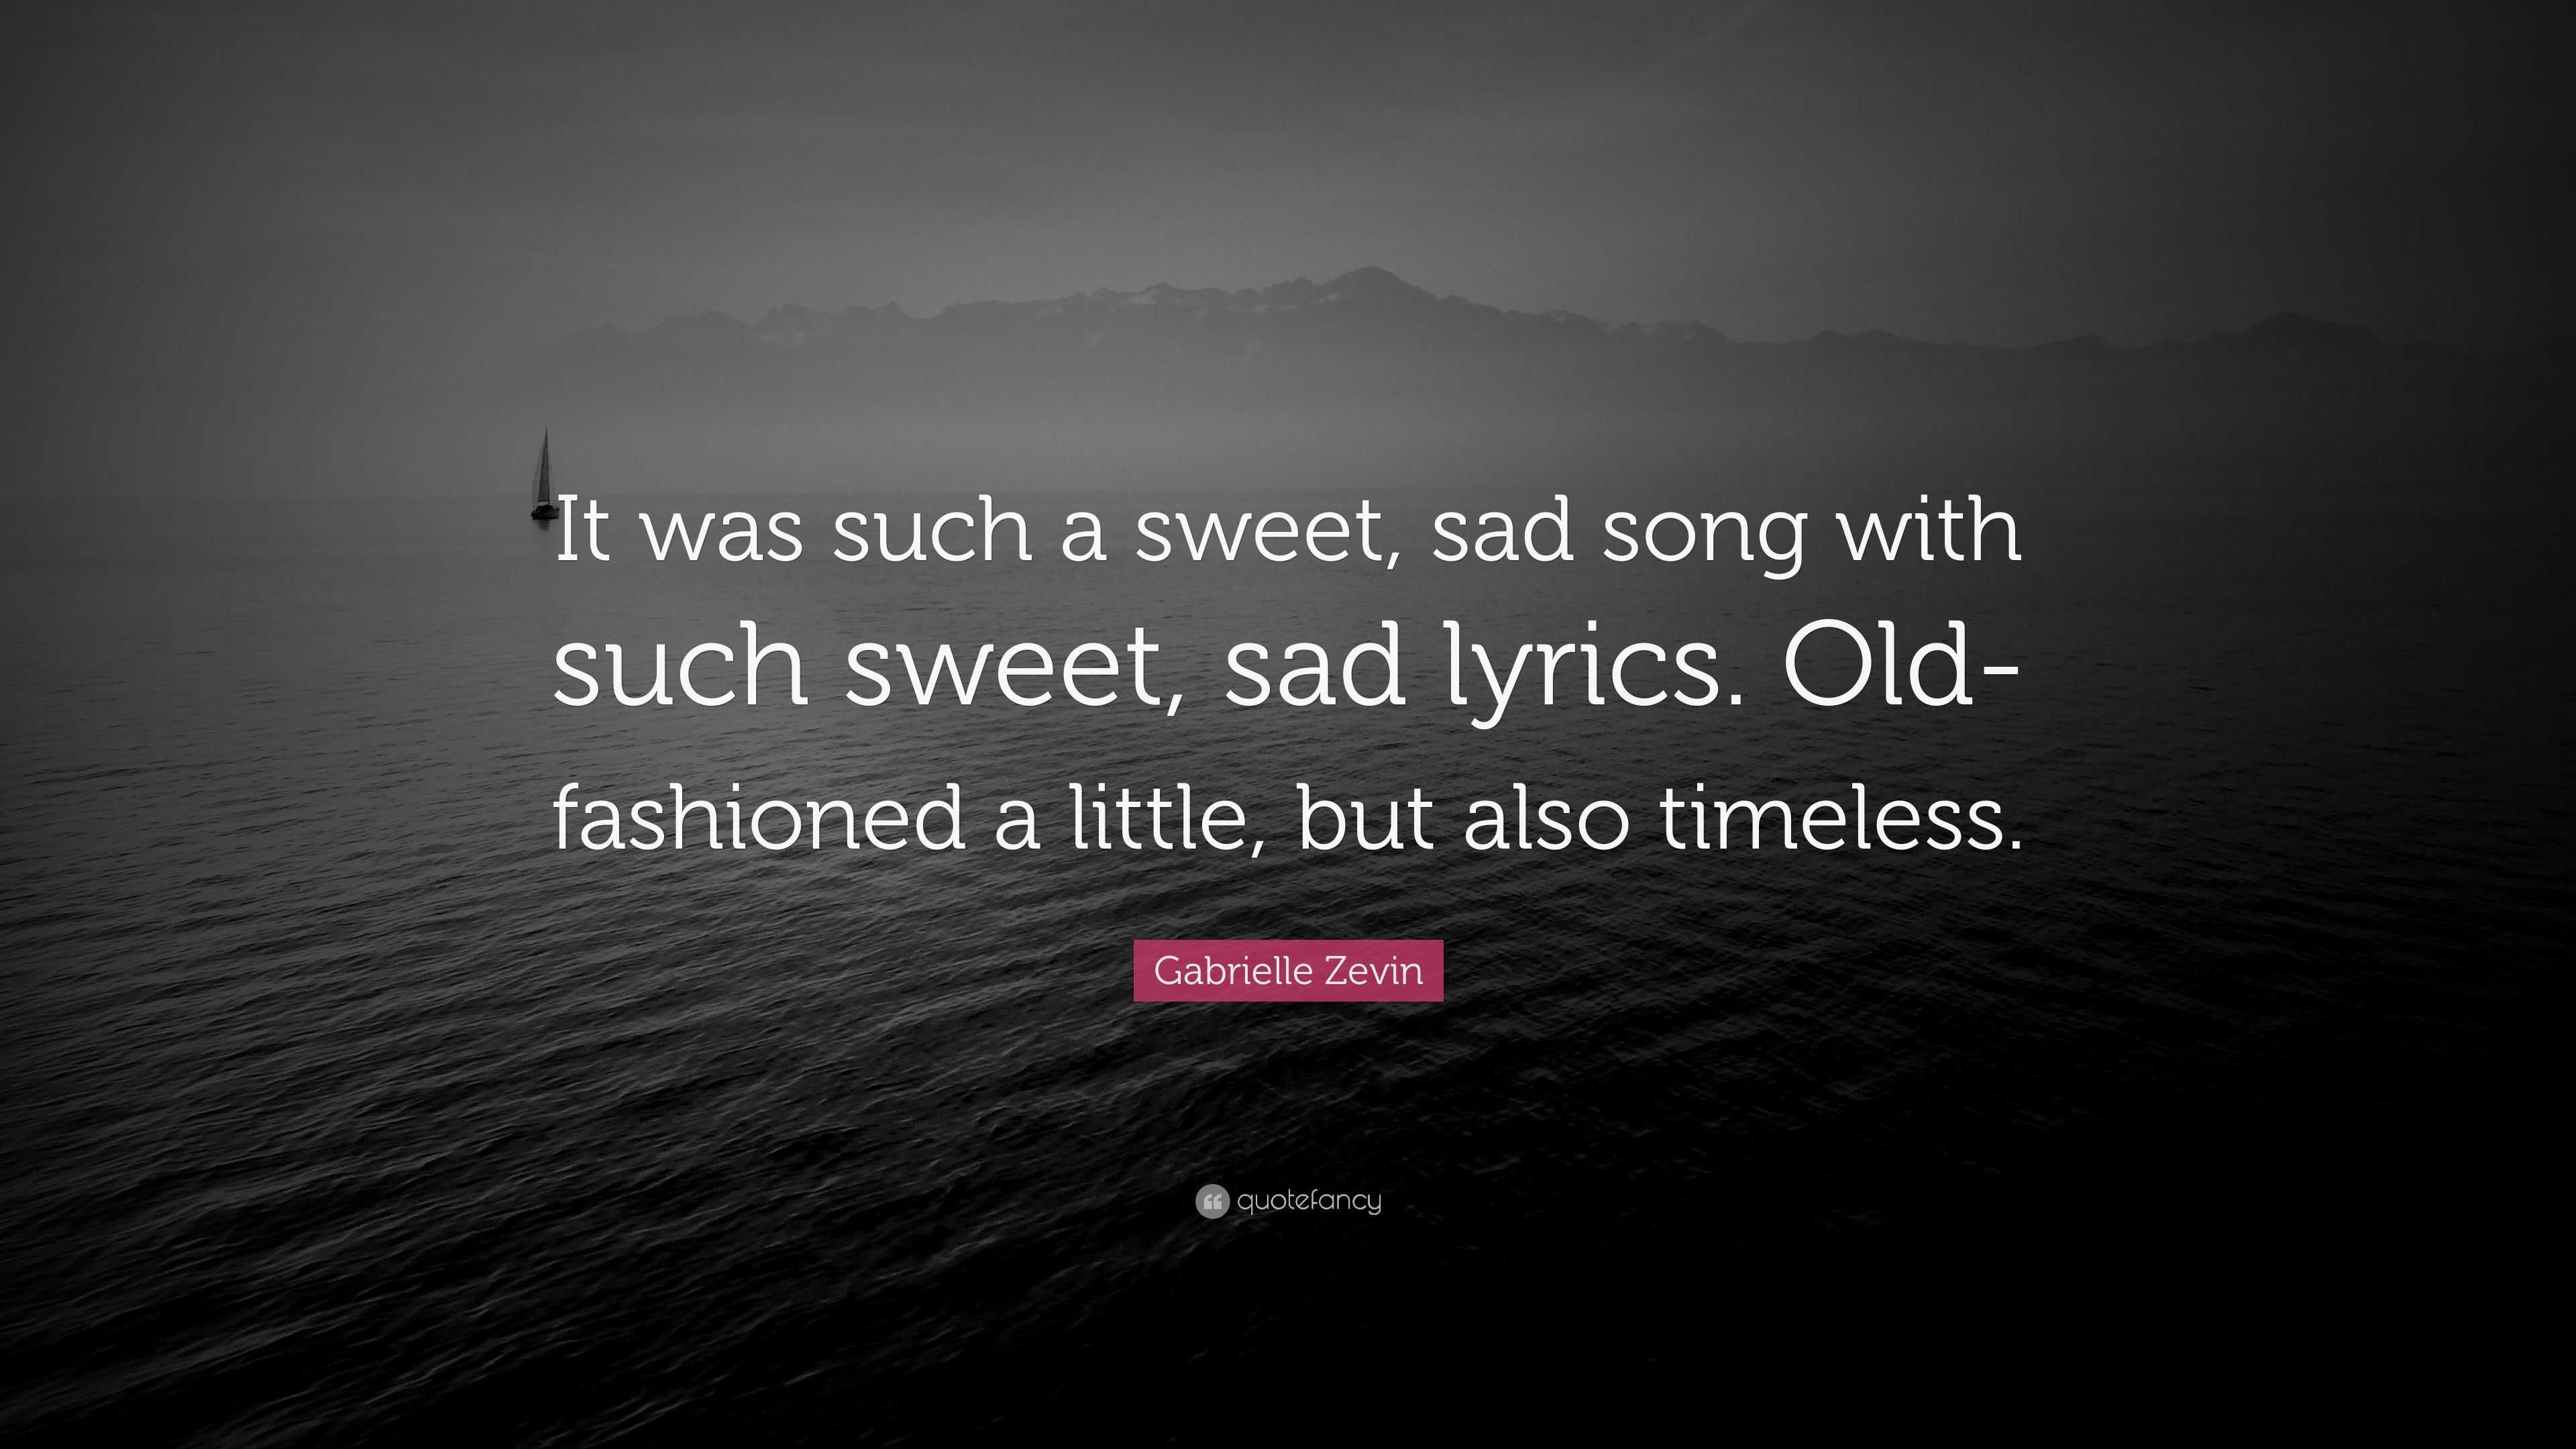 Gabrielle Zevin Quote: “It was such a sweet, sad song with such